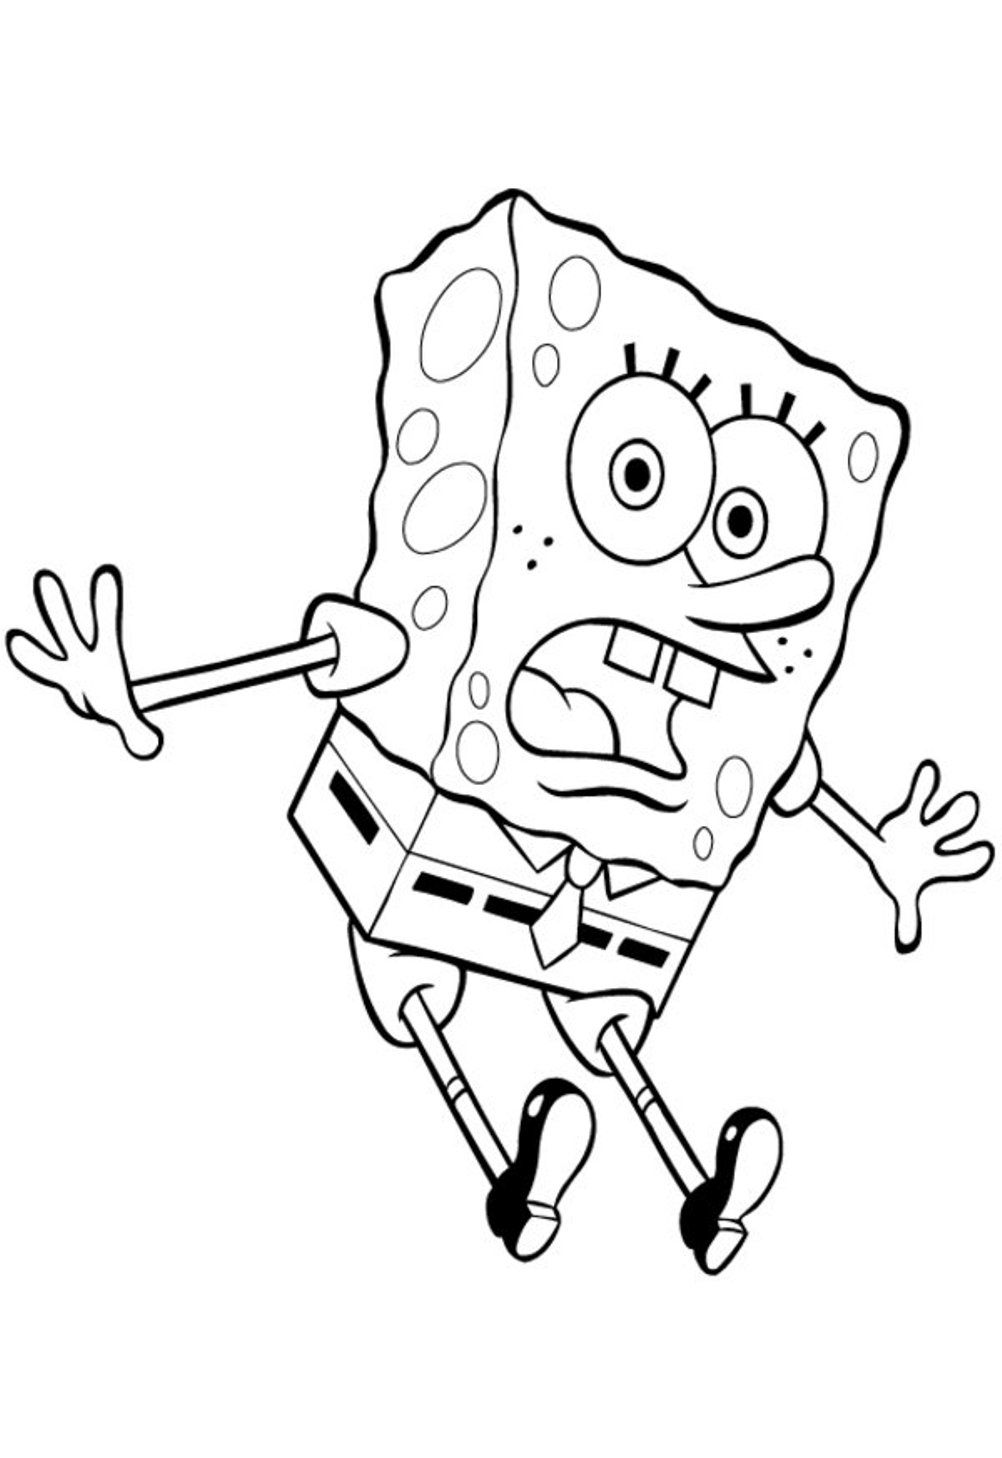 Spongebob And Squidward Coloring Pages - Coloring Home